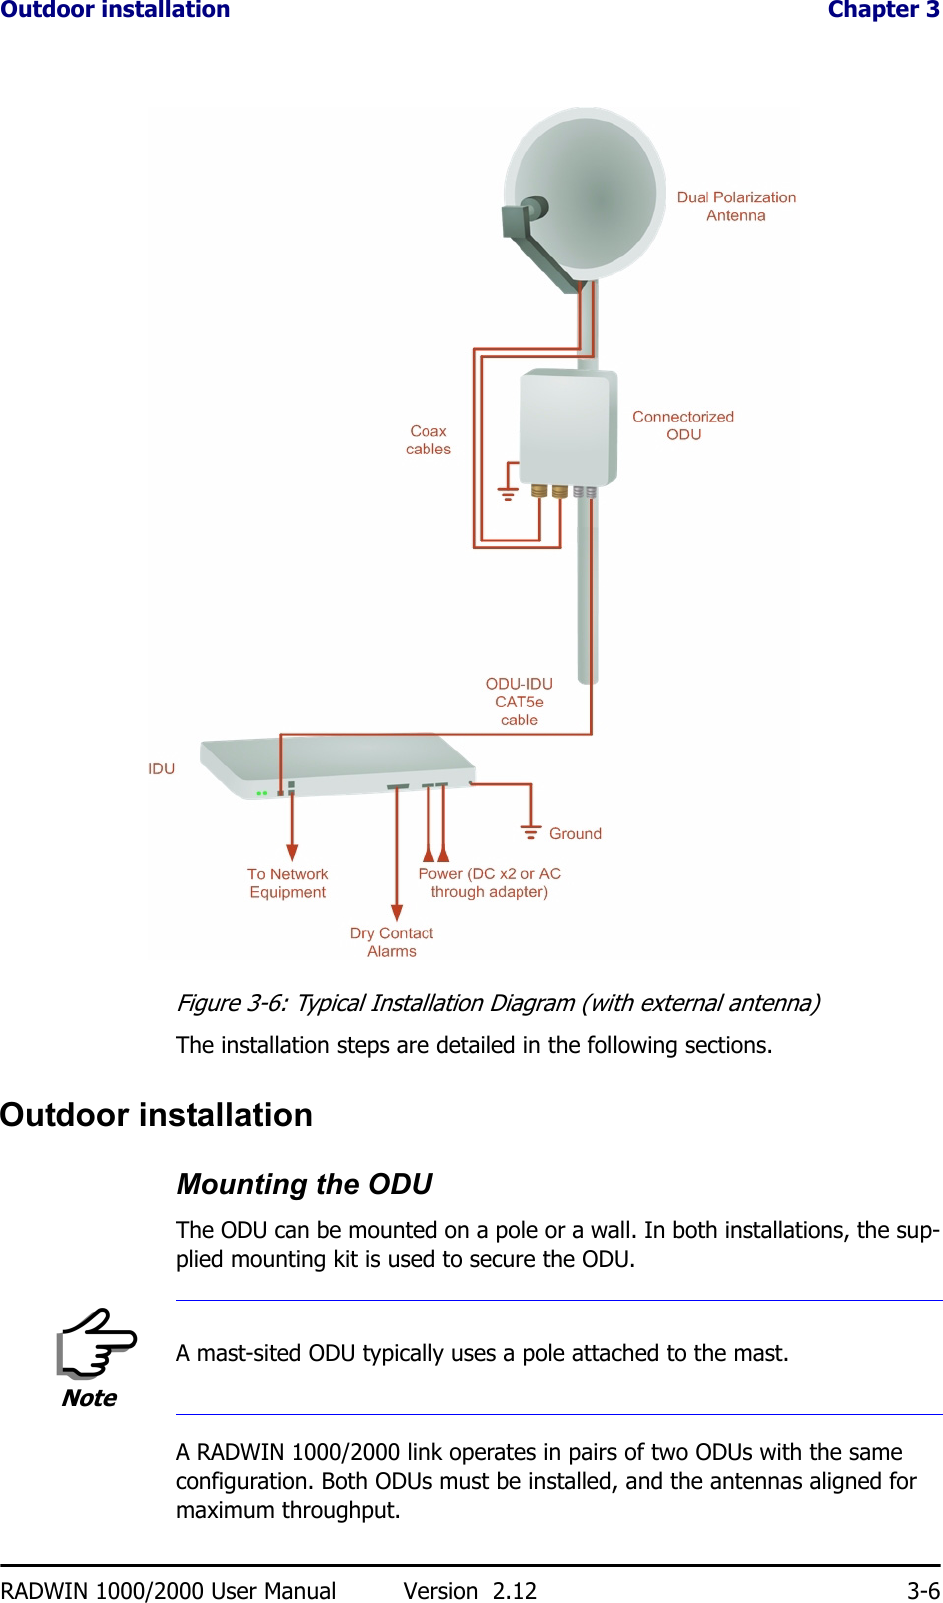 Outdoor installation  Chapter 3RADWIN 1000/2000 User Manual Version  2.12 3-6Figure 3-6: Typical Installation Diagram (with external antenna)The installation steps are detailed in the following sections.Outdoor installationMounting the ODUThe ODU can be mounted on a pole or a wall. In both installations, the sup-plied mounting kit is used to secure the ODU.A RADWIN 1000/2000 link operates in pairs of two ODUs with the same configuration. Both ODUs must be installed, and the antennas aligned for maximum throughput.NoteA mast-sited ODU typically uses a pole attached to the mast.